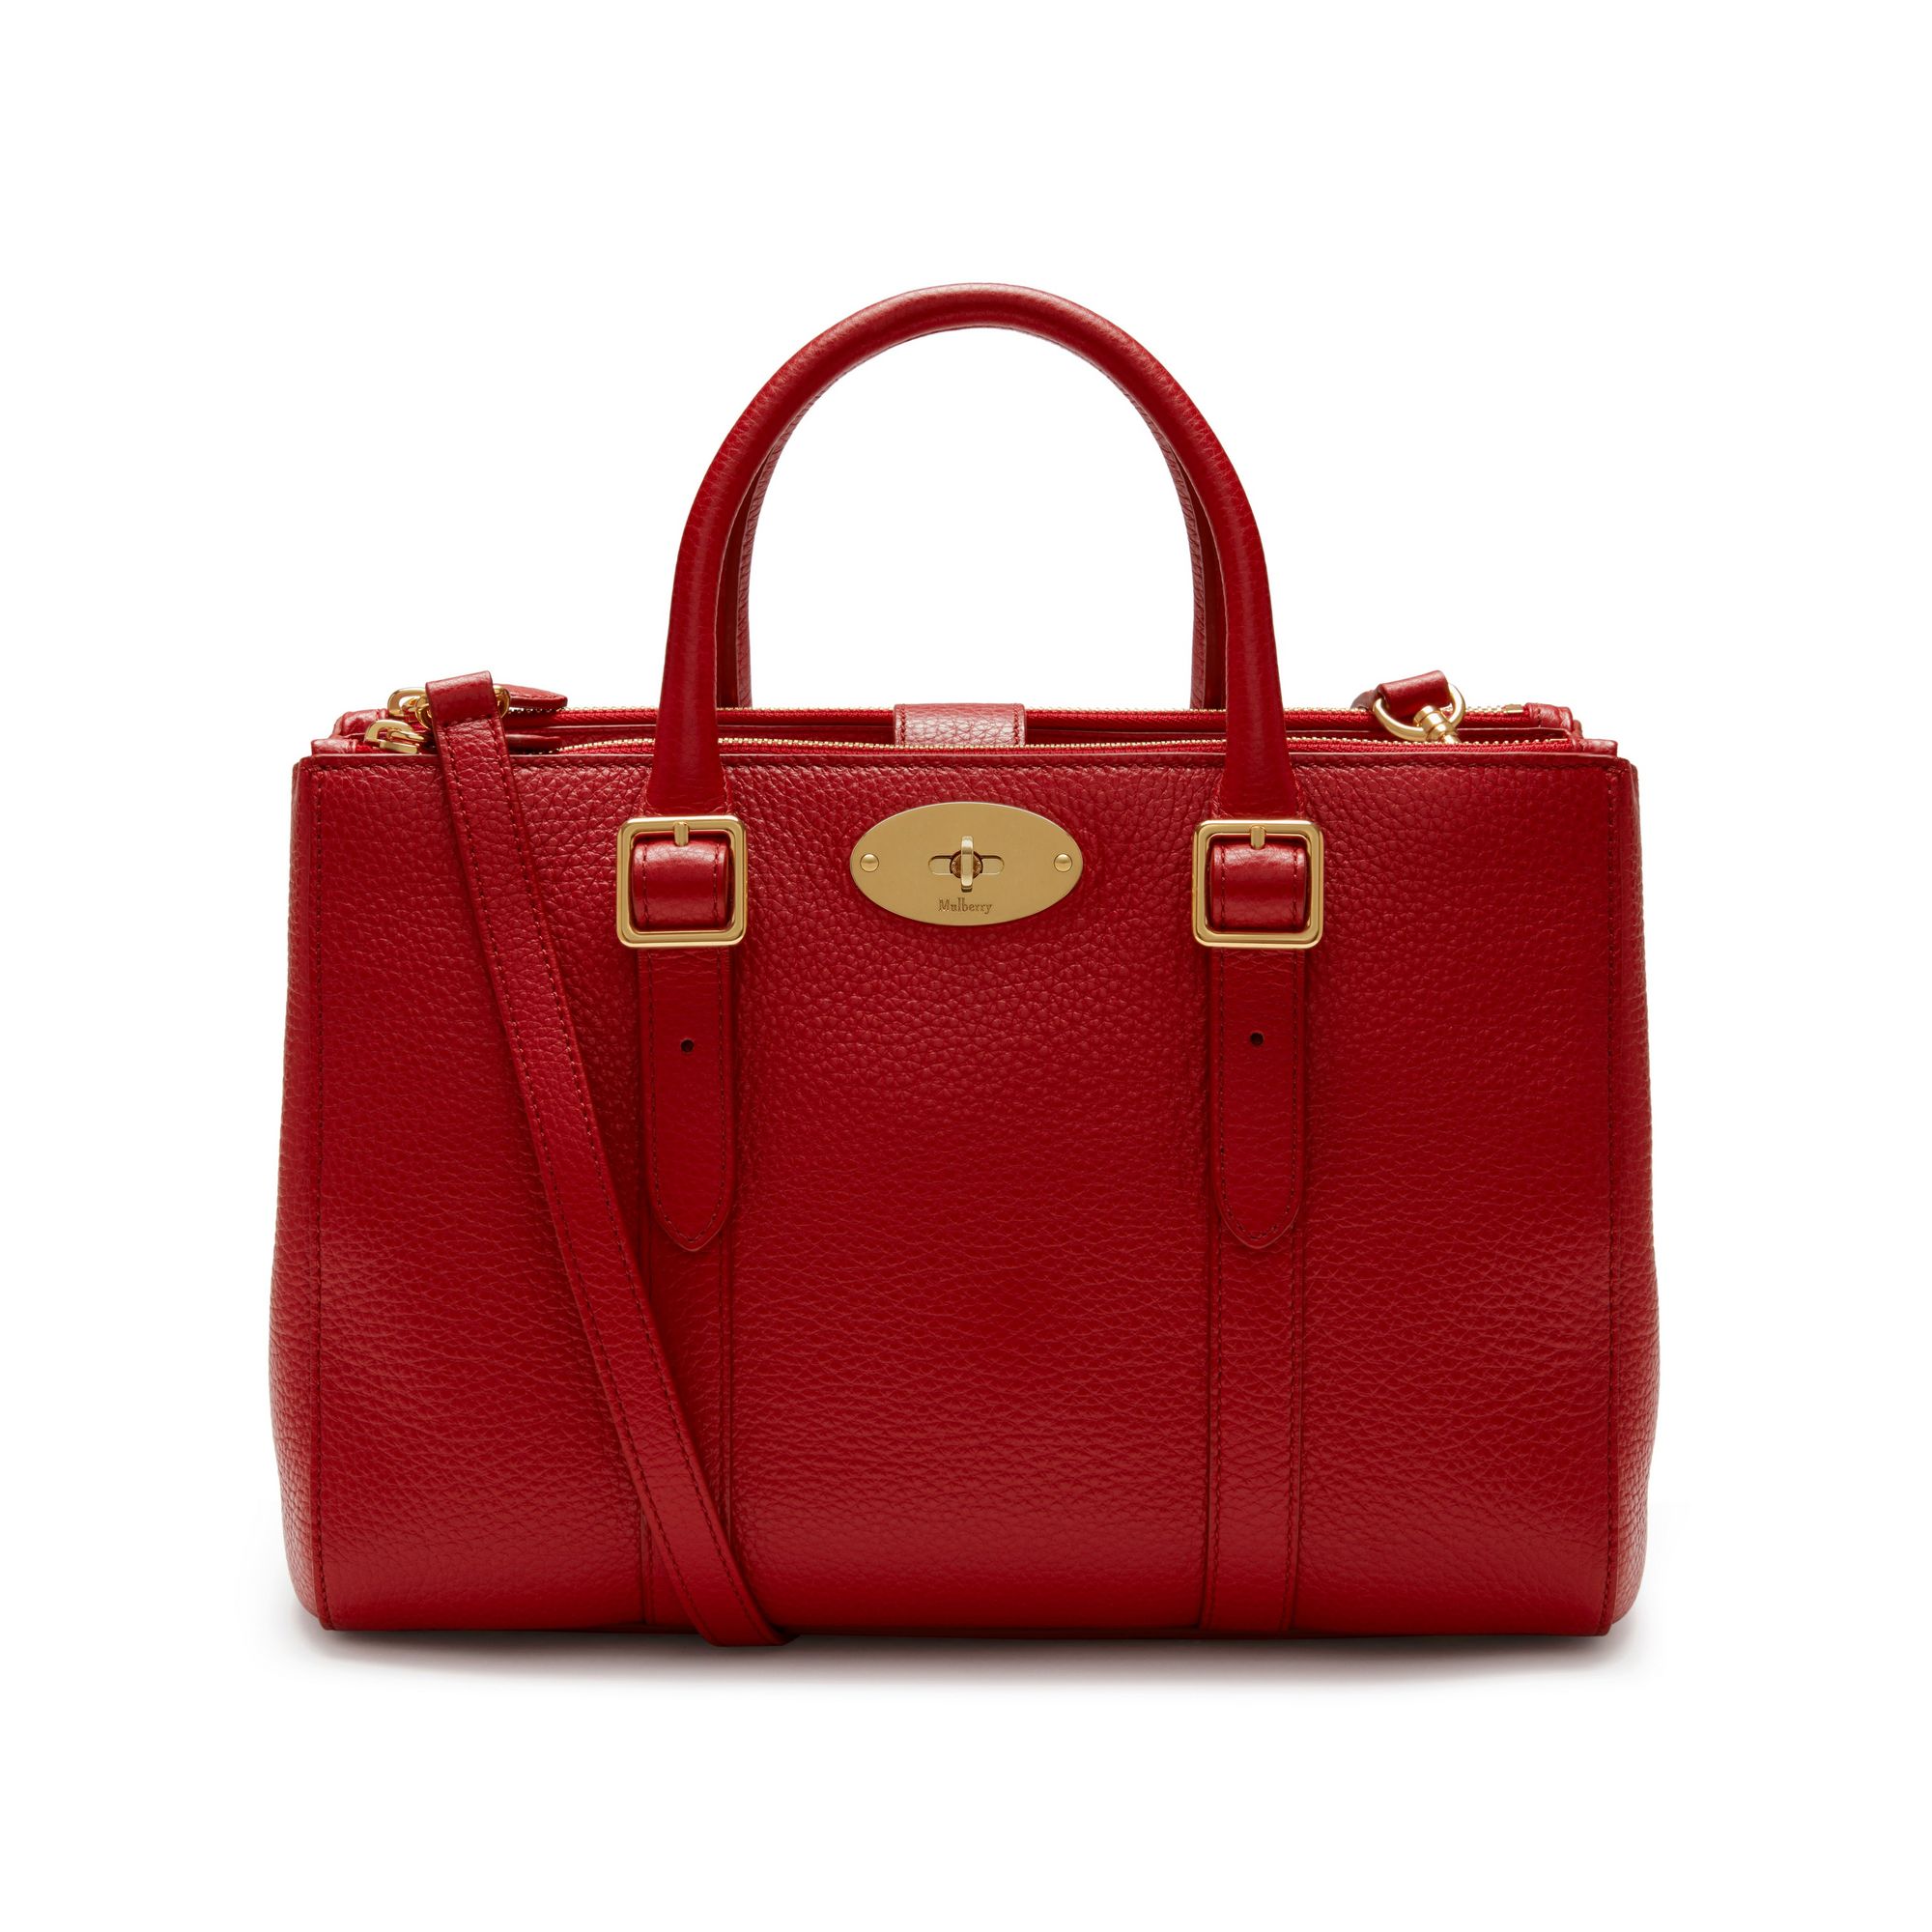 Mulberry Small Bayswater Double Zip Tote in Scarlett